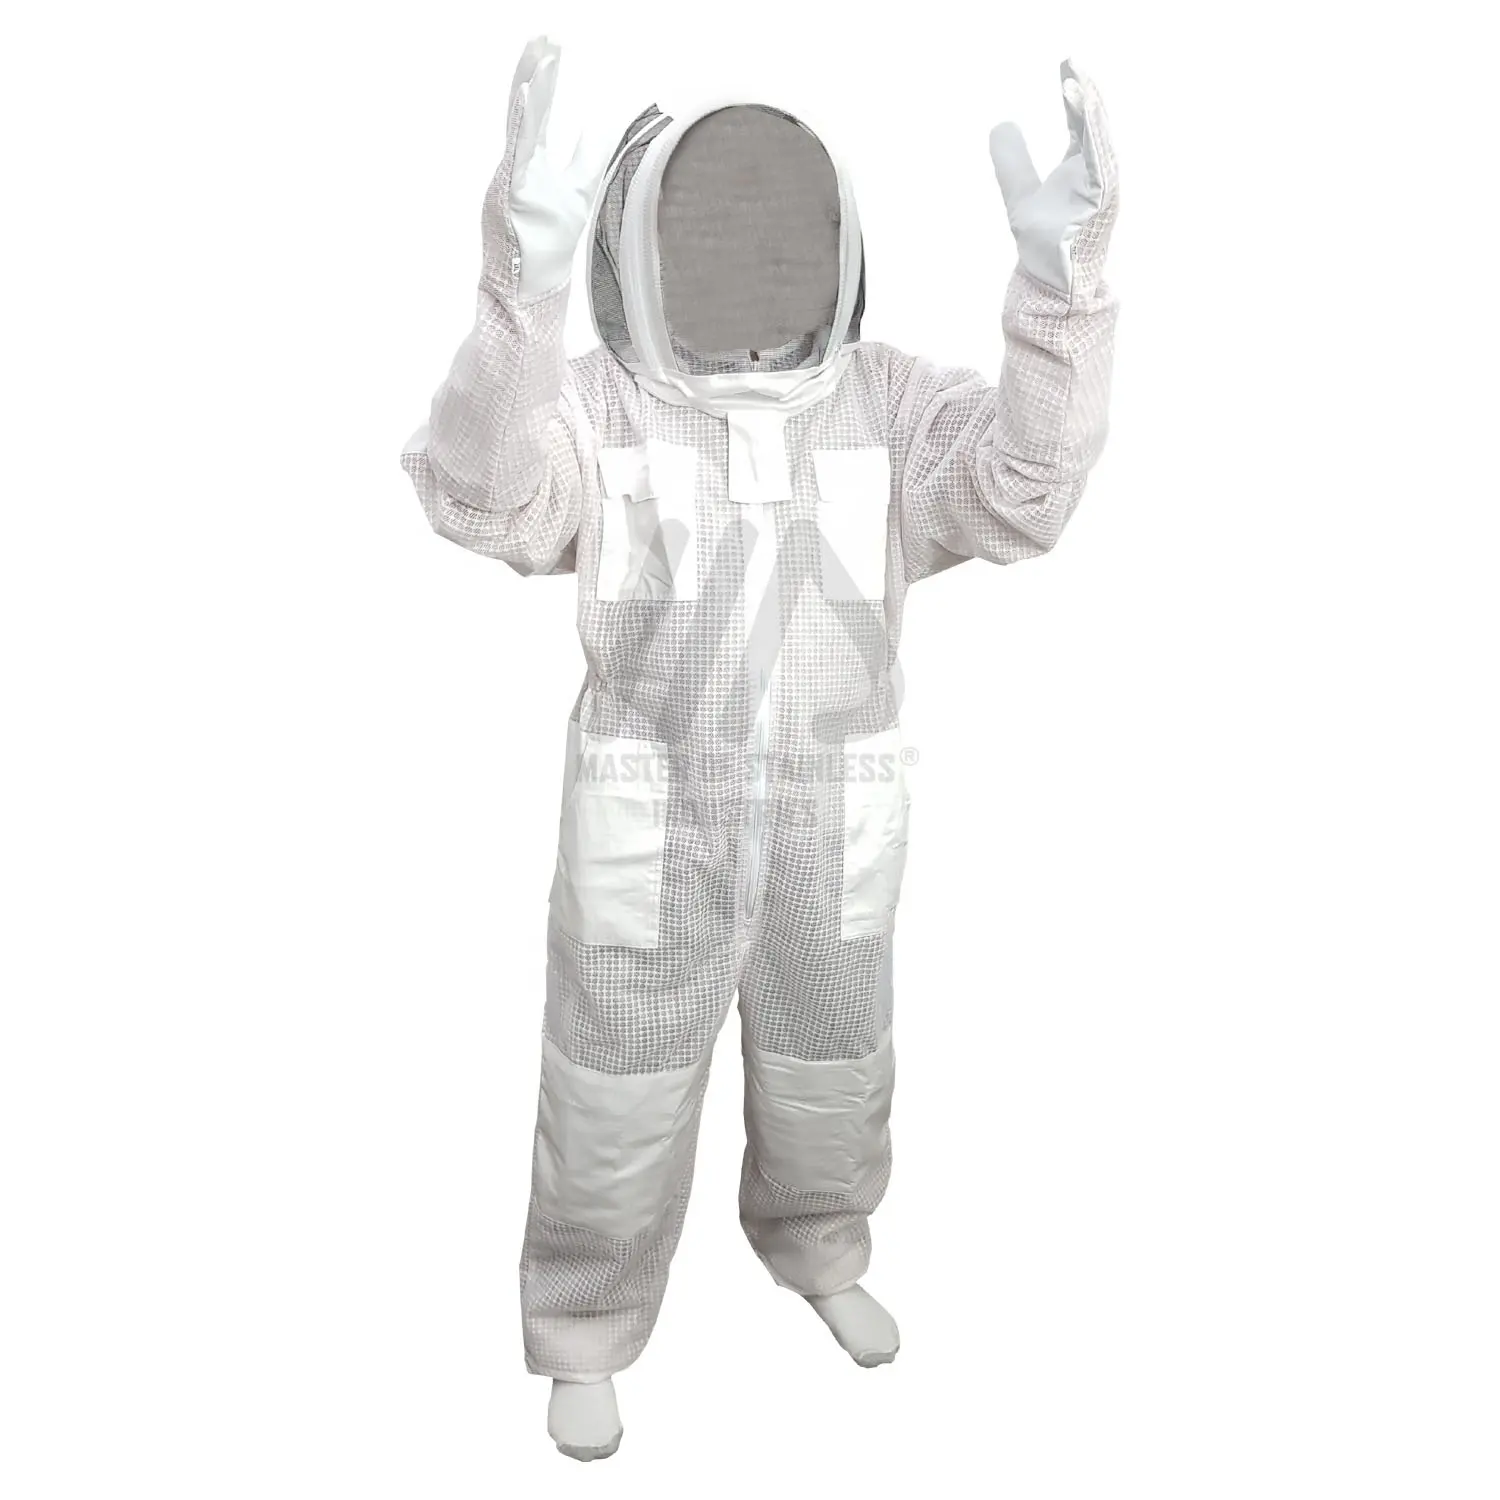 Full Body protection Beekeeping suit clothing honeybee protective beekeeping veil uniform 100% cotton fabric water proof clothes